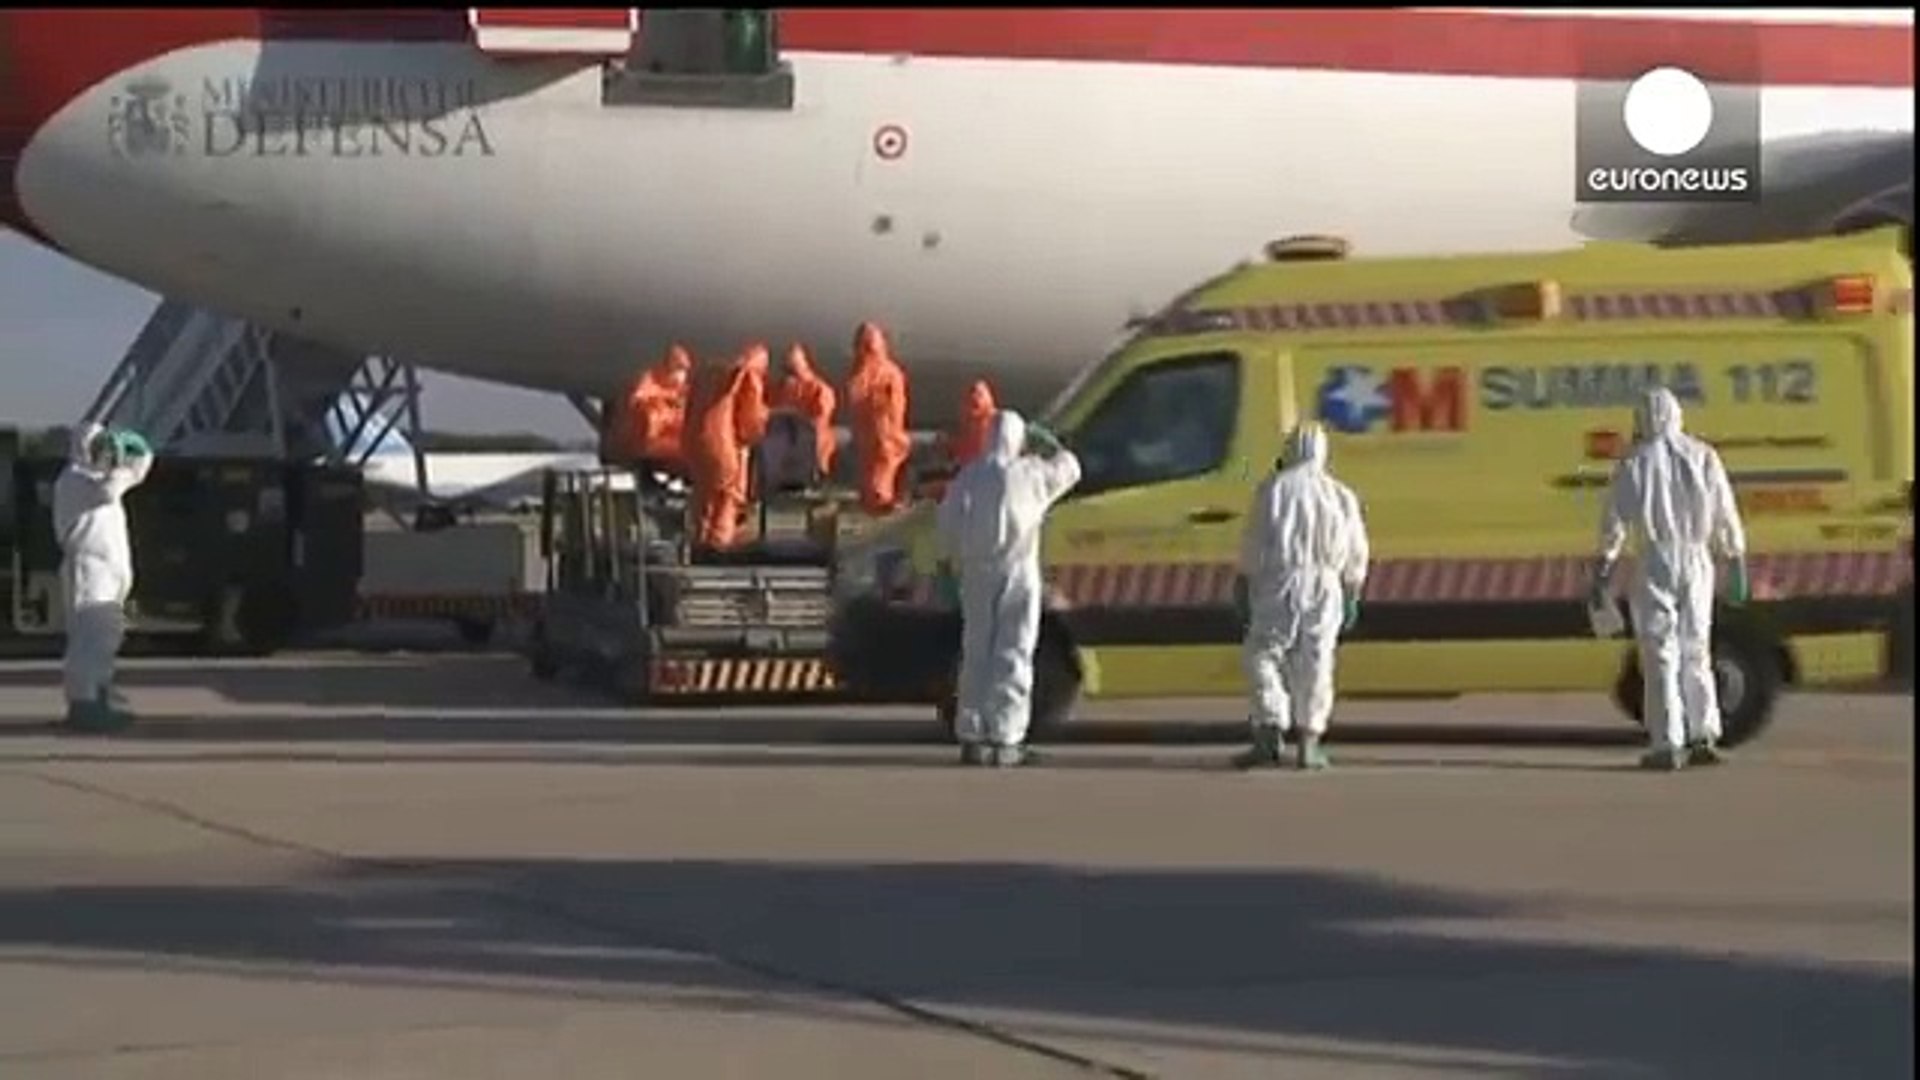 Video: First Ebola victim arrives in Spain under tight security